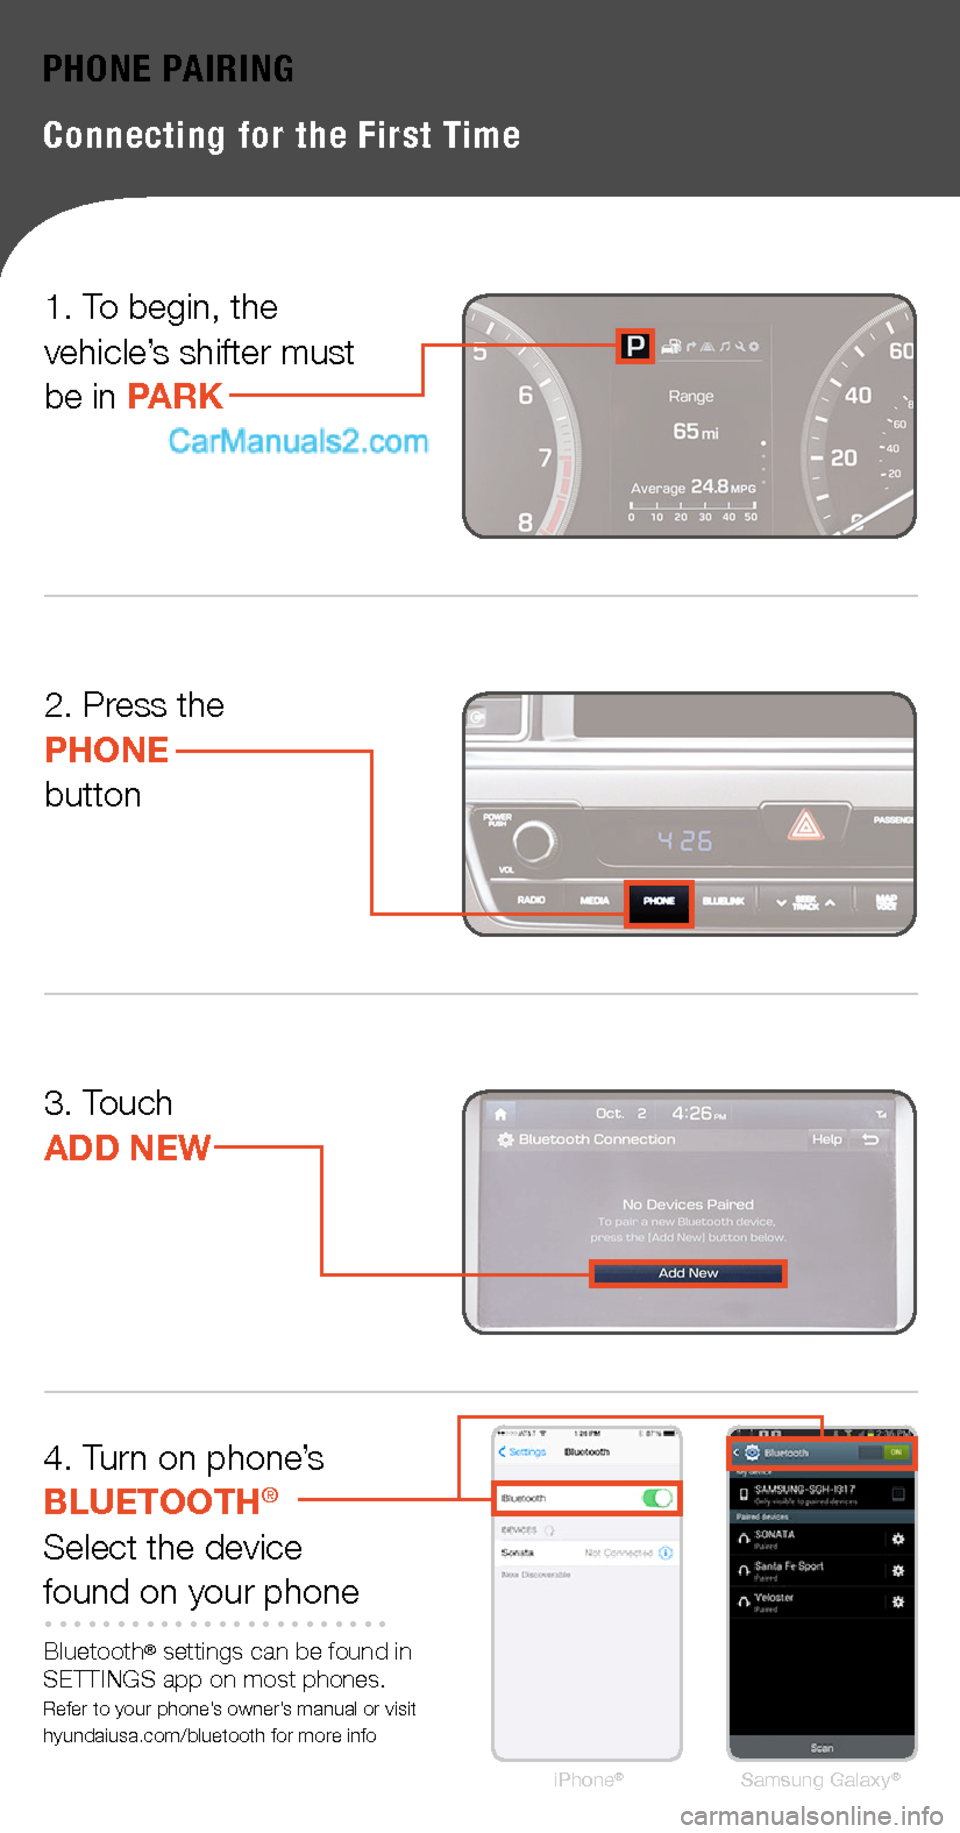 Hyundai Sonata 2015  Quick Tips PHONE PAIRING
Connecting for the First Time
2. Press thePHONEbutton
3. Touch  ADD NEW
4. Turn on phone’s  BLUETOOTH®
Select the devicefound on your phone
Bluetooth® settings can be found in SETTIN